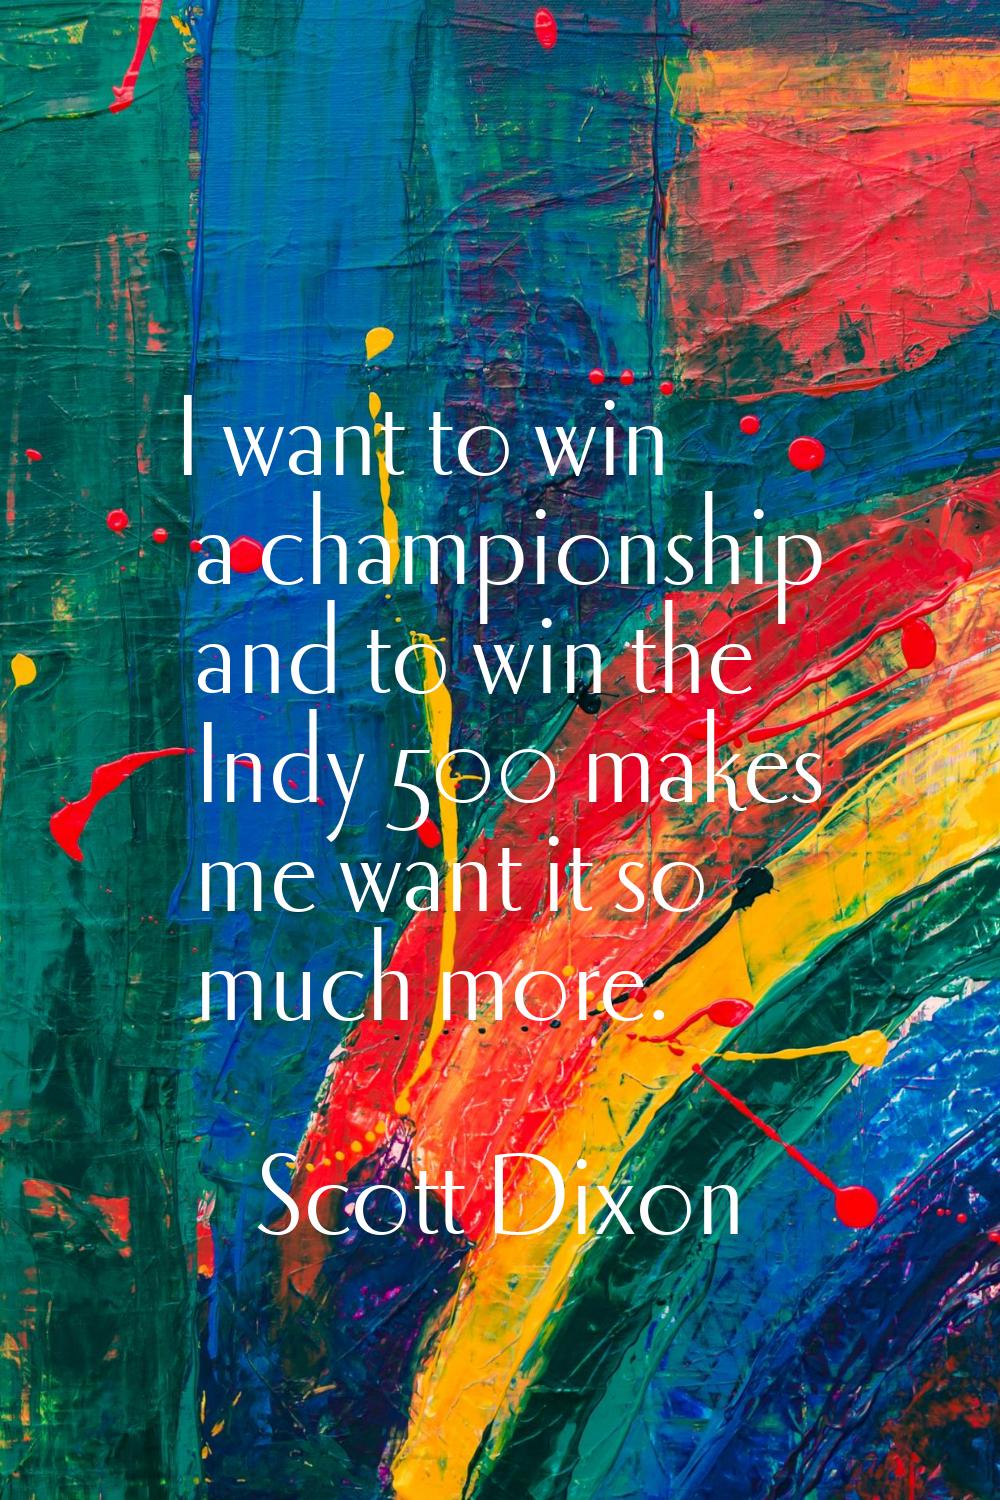 I want to win a championship and to win the Indy 500 makes me want it so much more.